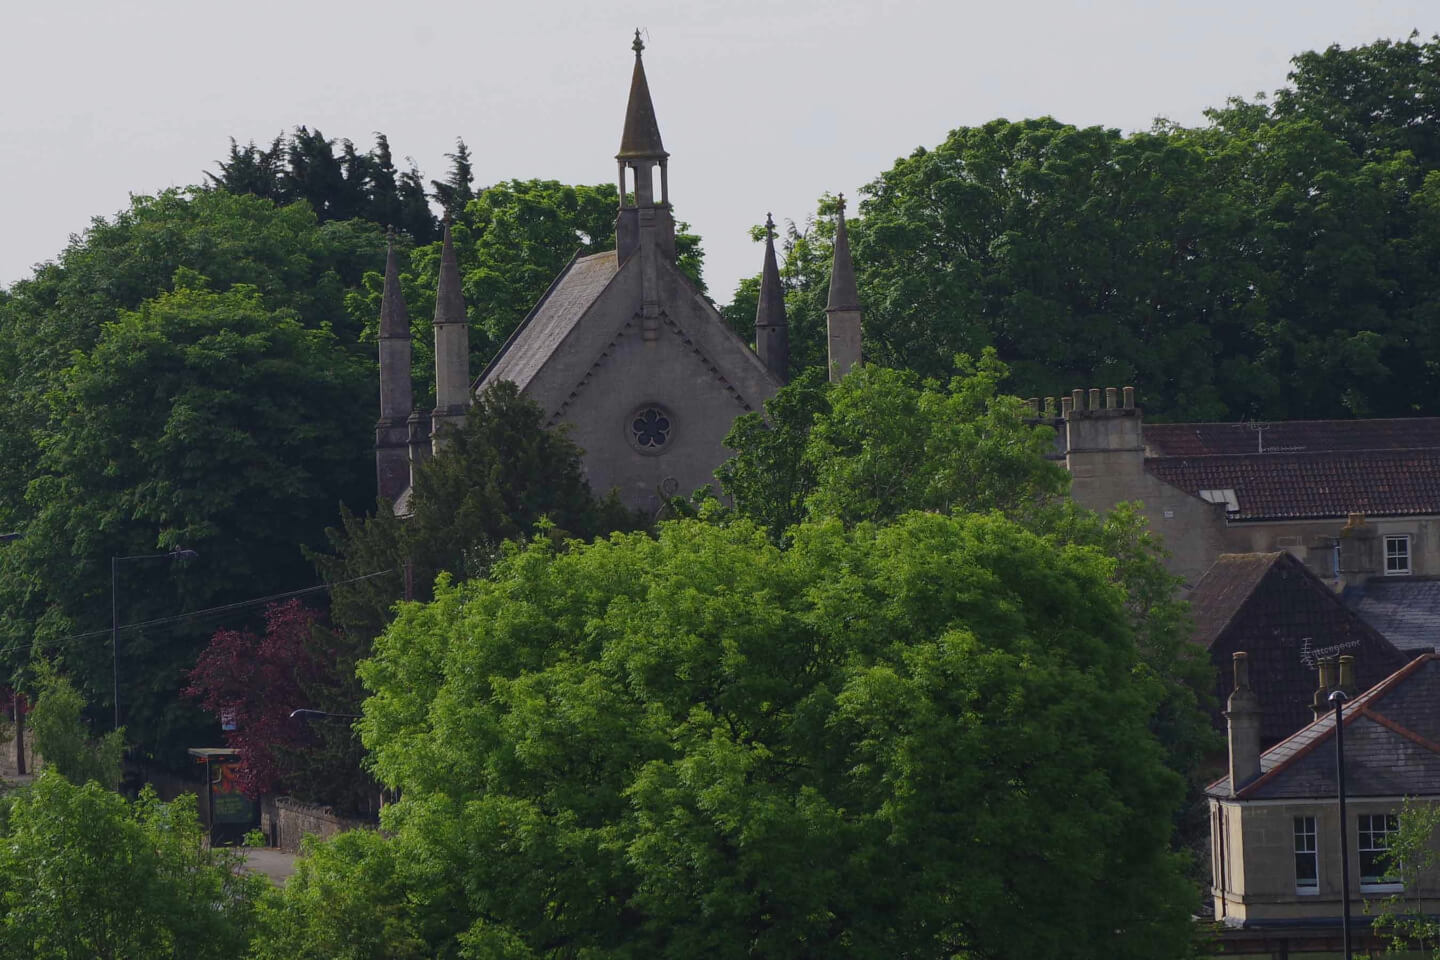 Student Accommodation in Odd Down, Bath - view of church through the trees